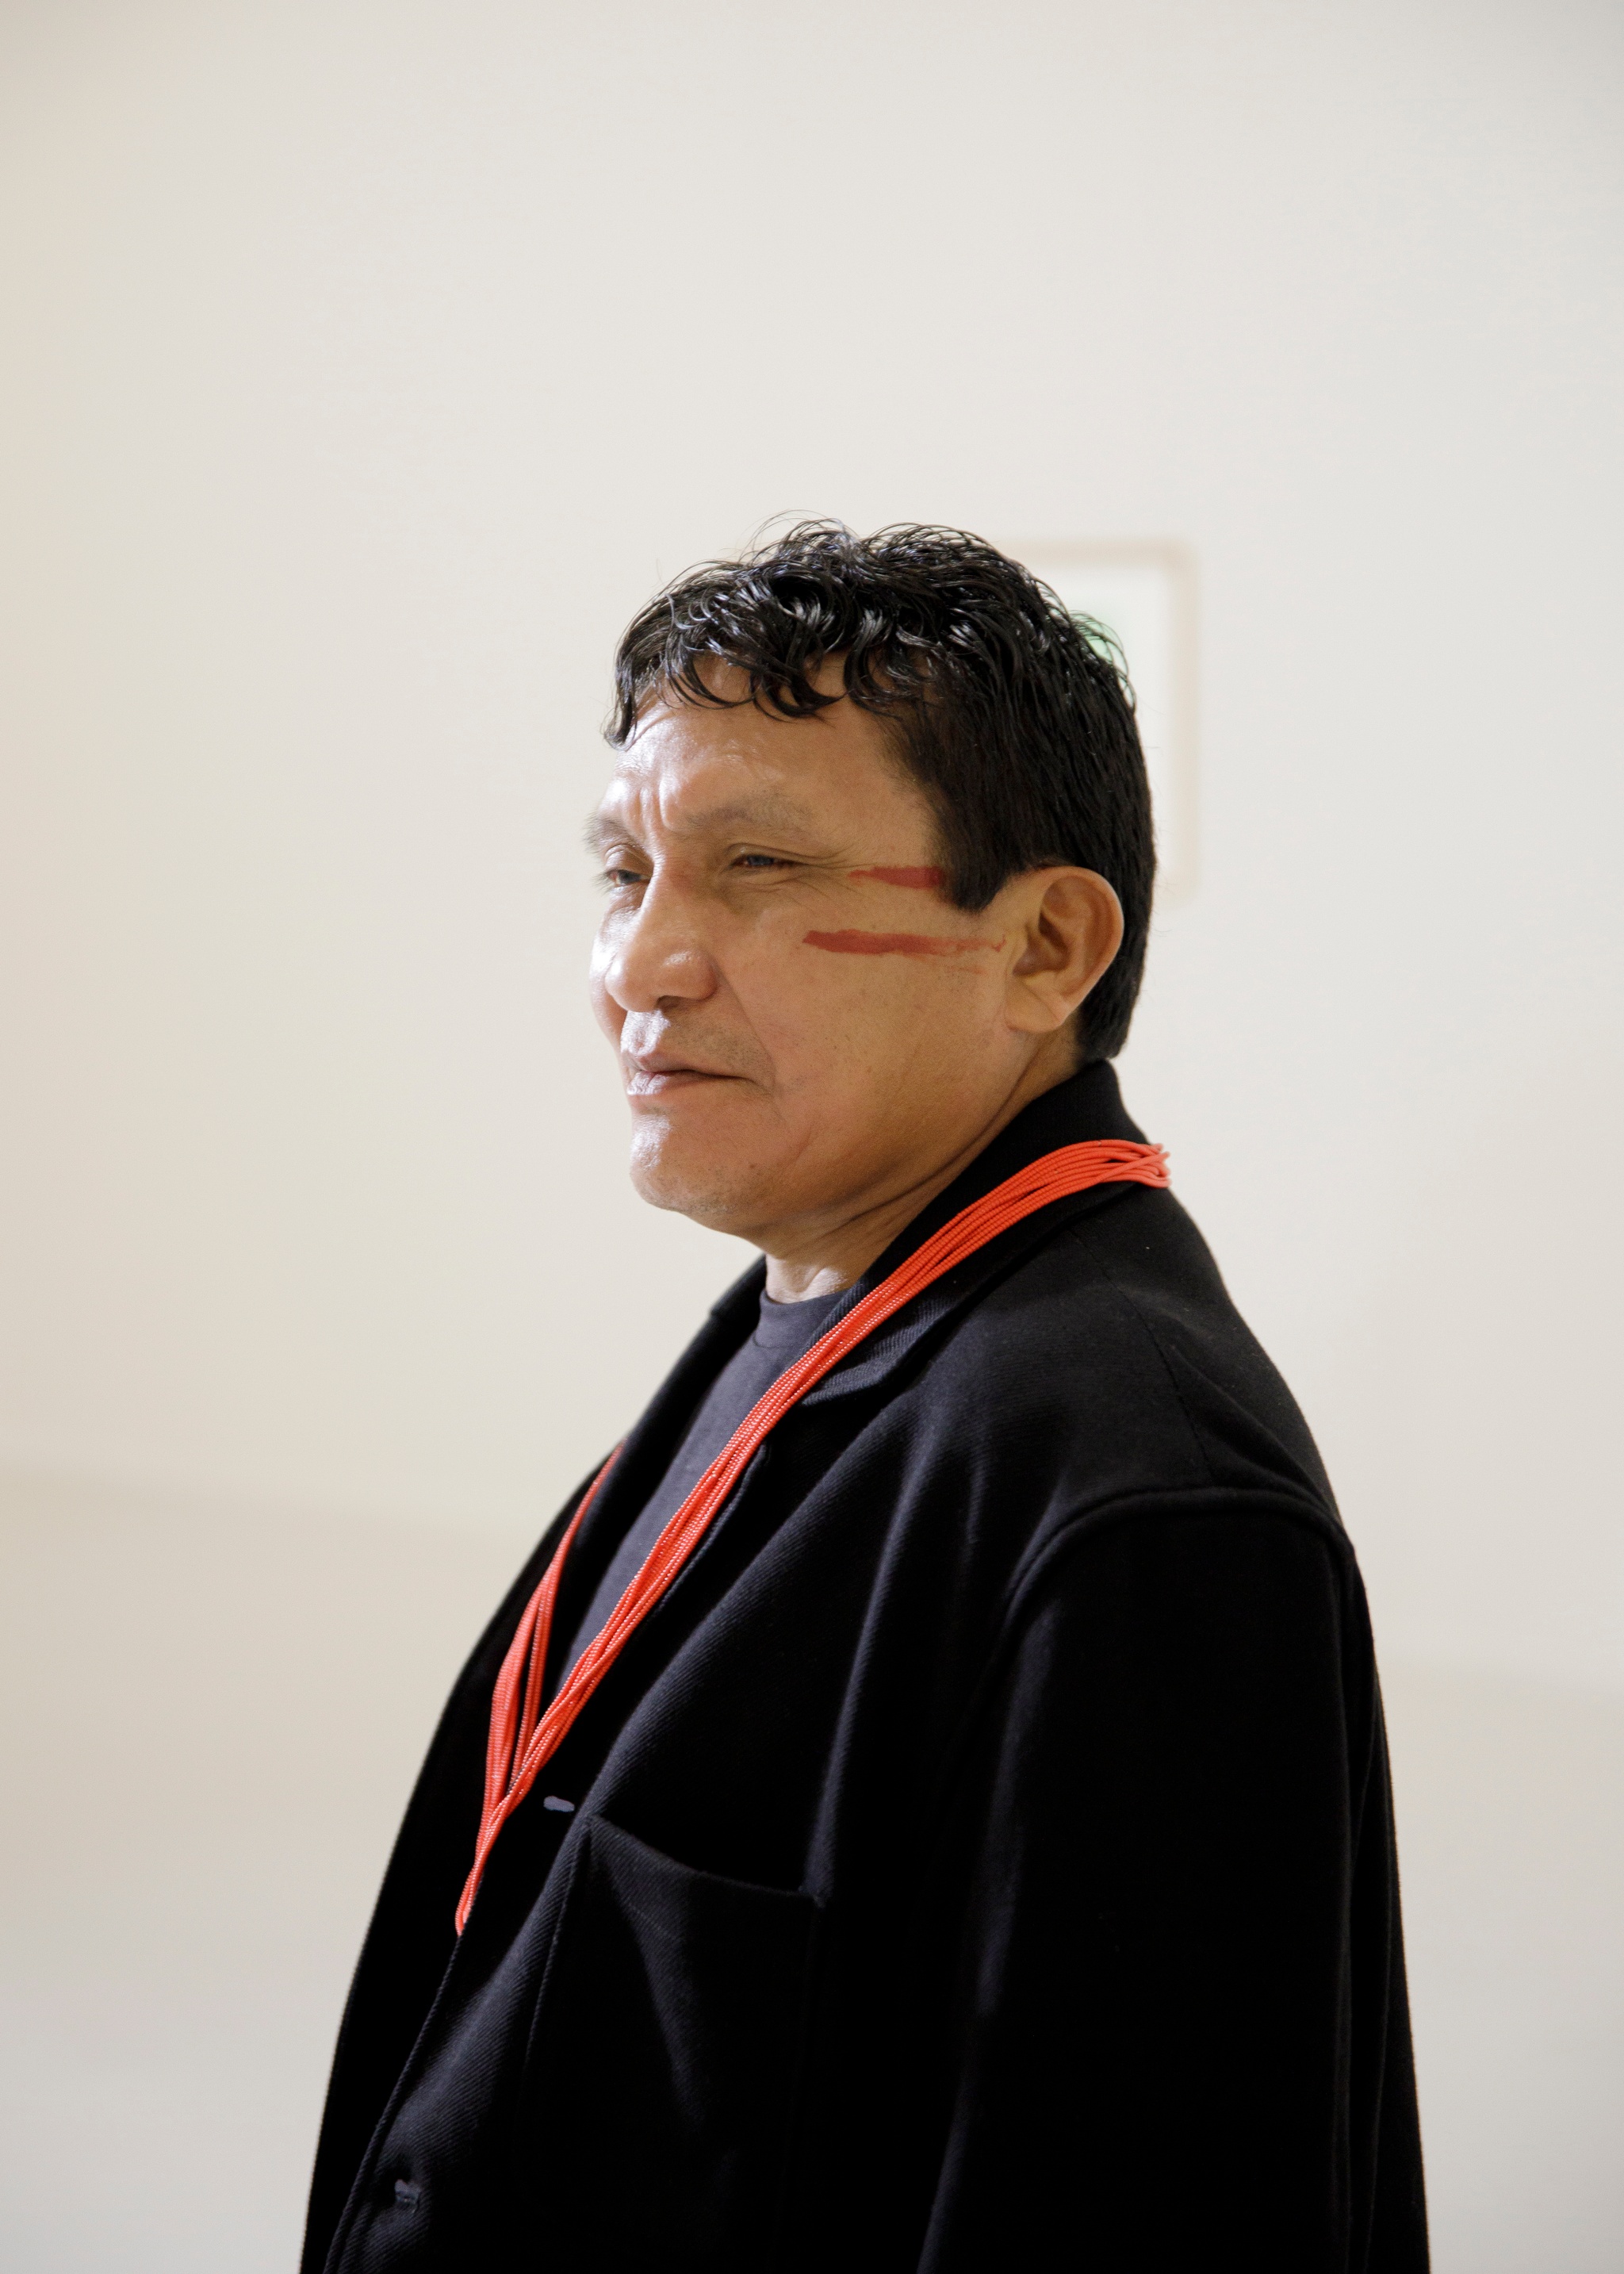 A portrait of artist Joseca Mokahesi. An Indigenous Yanomami man seen in three quarter view in an empty white gallery space. He wears a black blazer with a red ribbon around his neck. He has short dark hair and his face is painted with red lines at the top of his cheekbones.